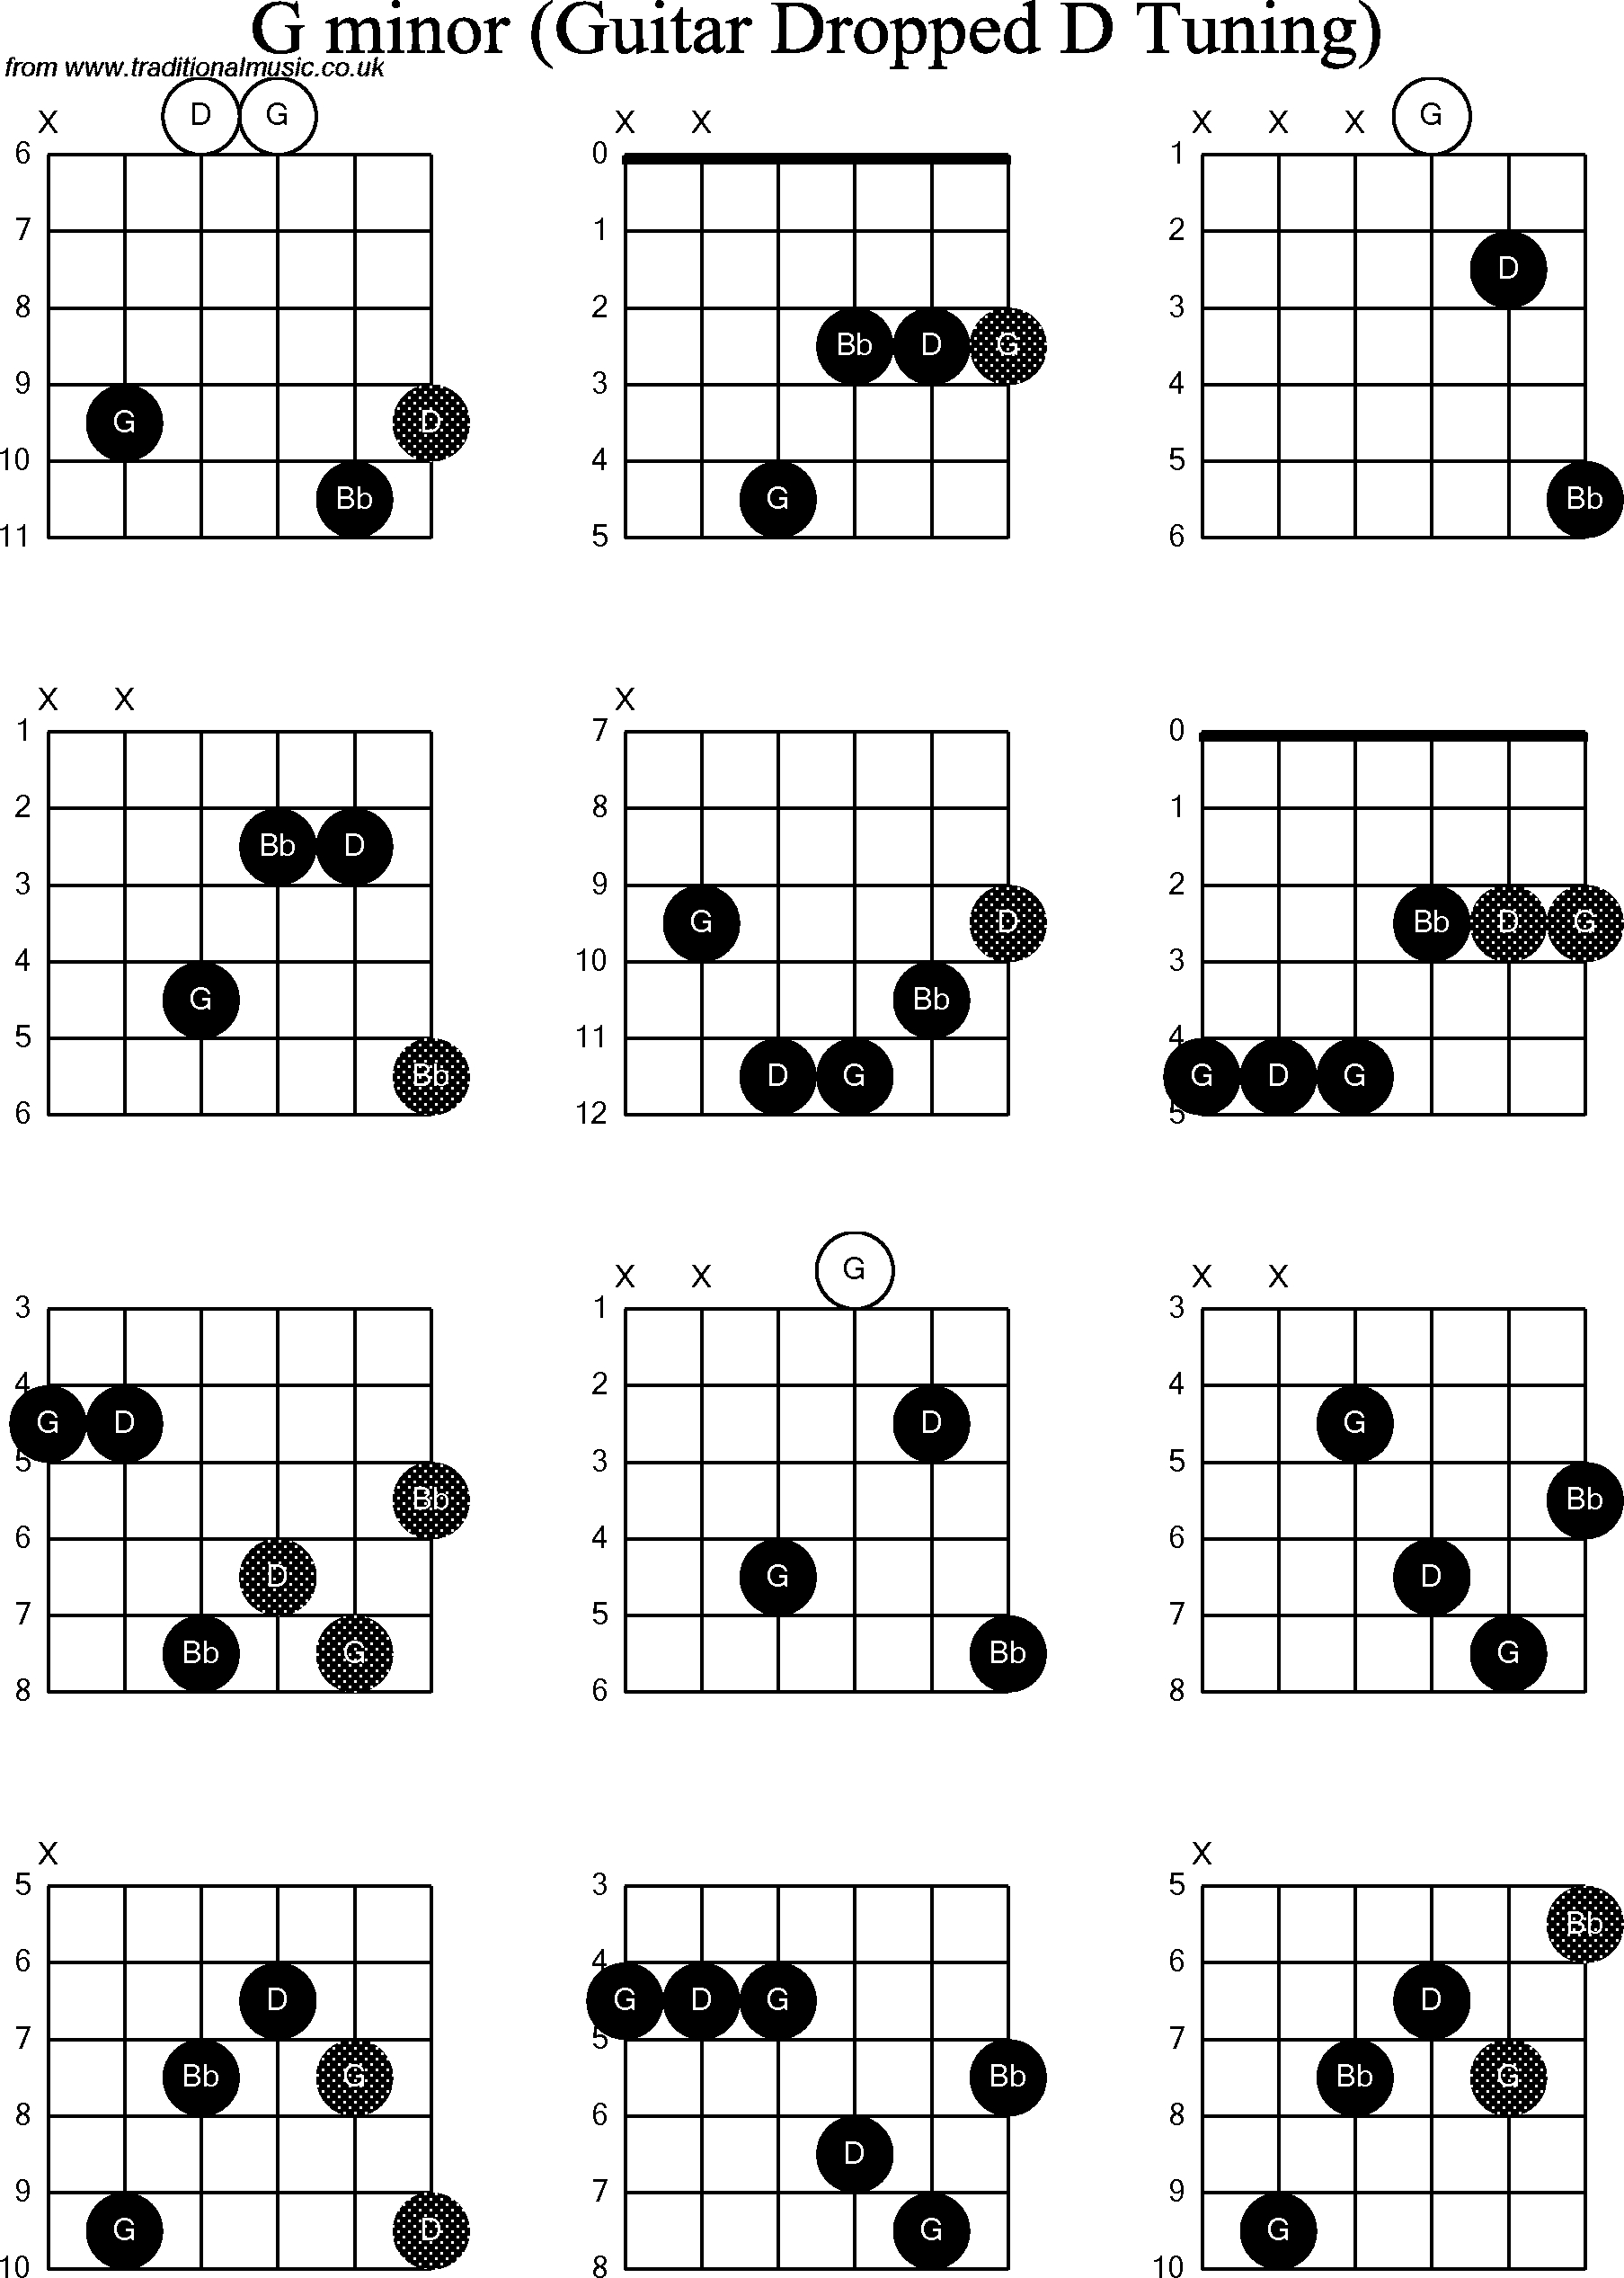 G Minor Chord Chord Diagrams For Dropped D Guitardadgbe G Minor